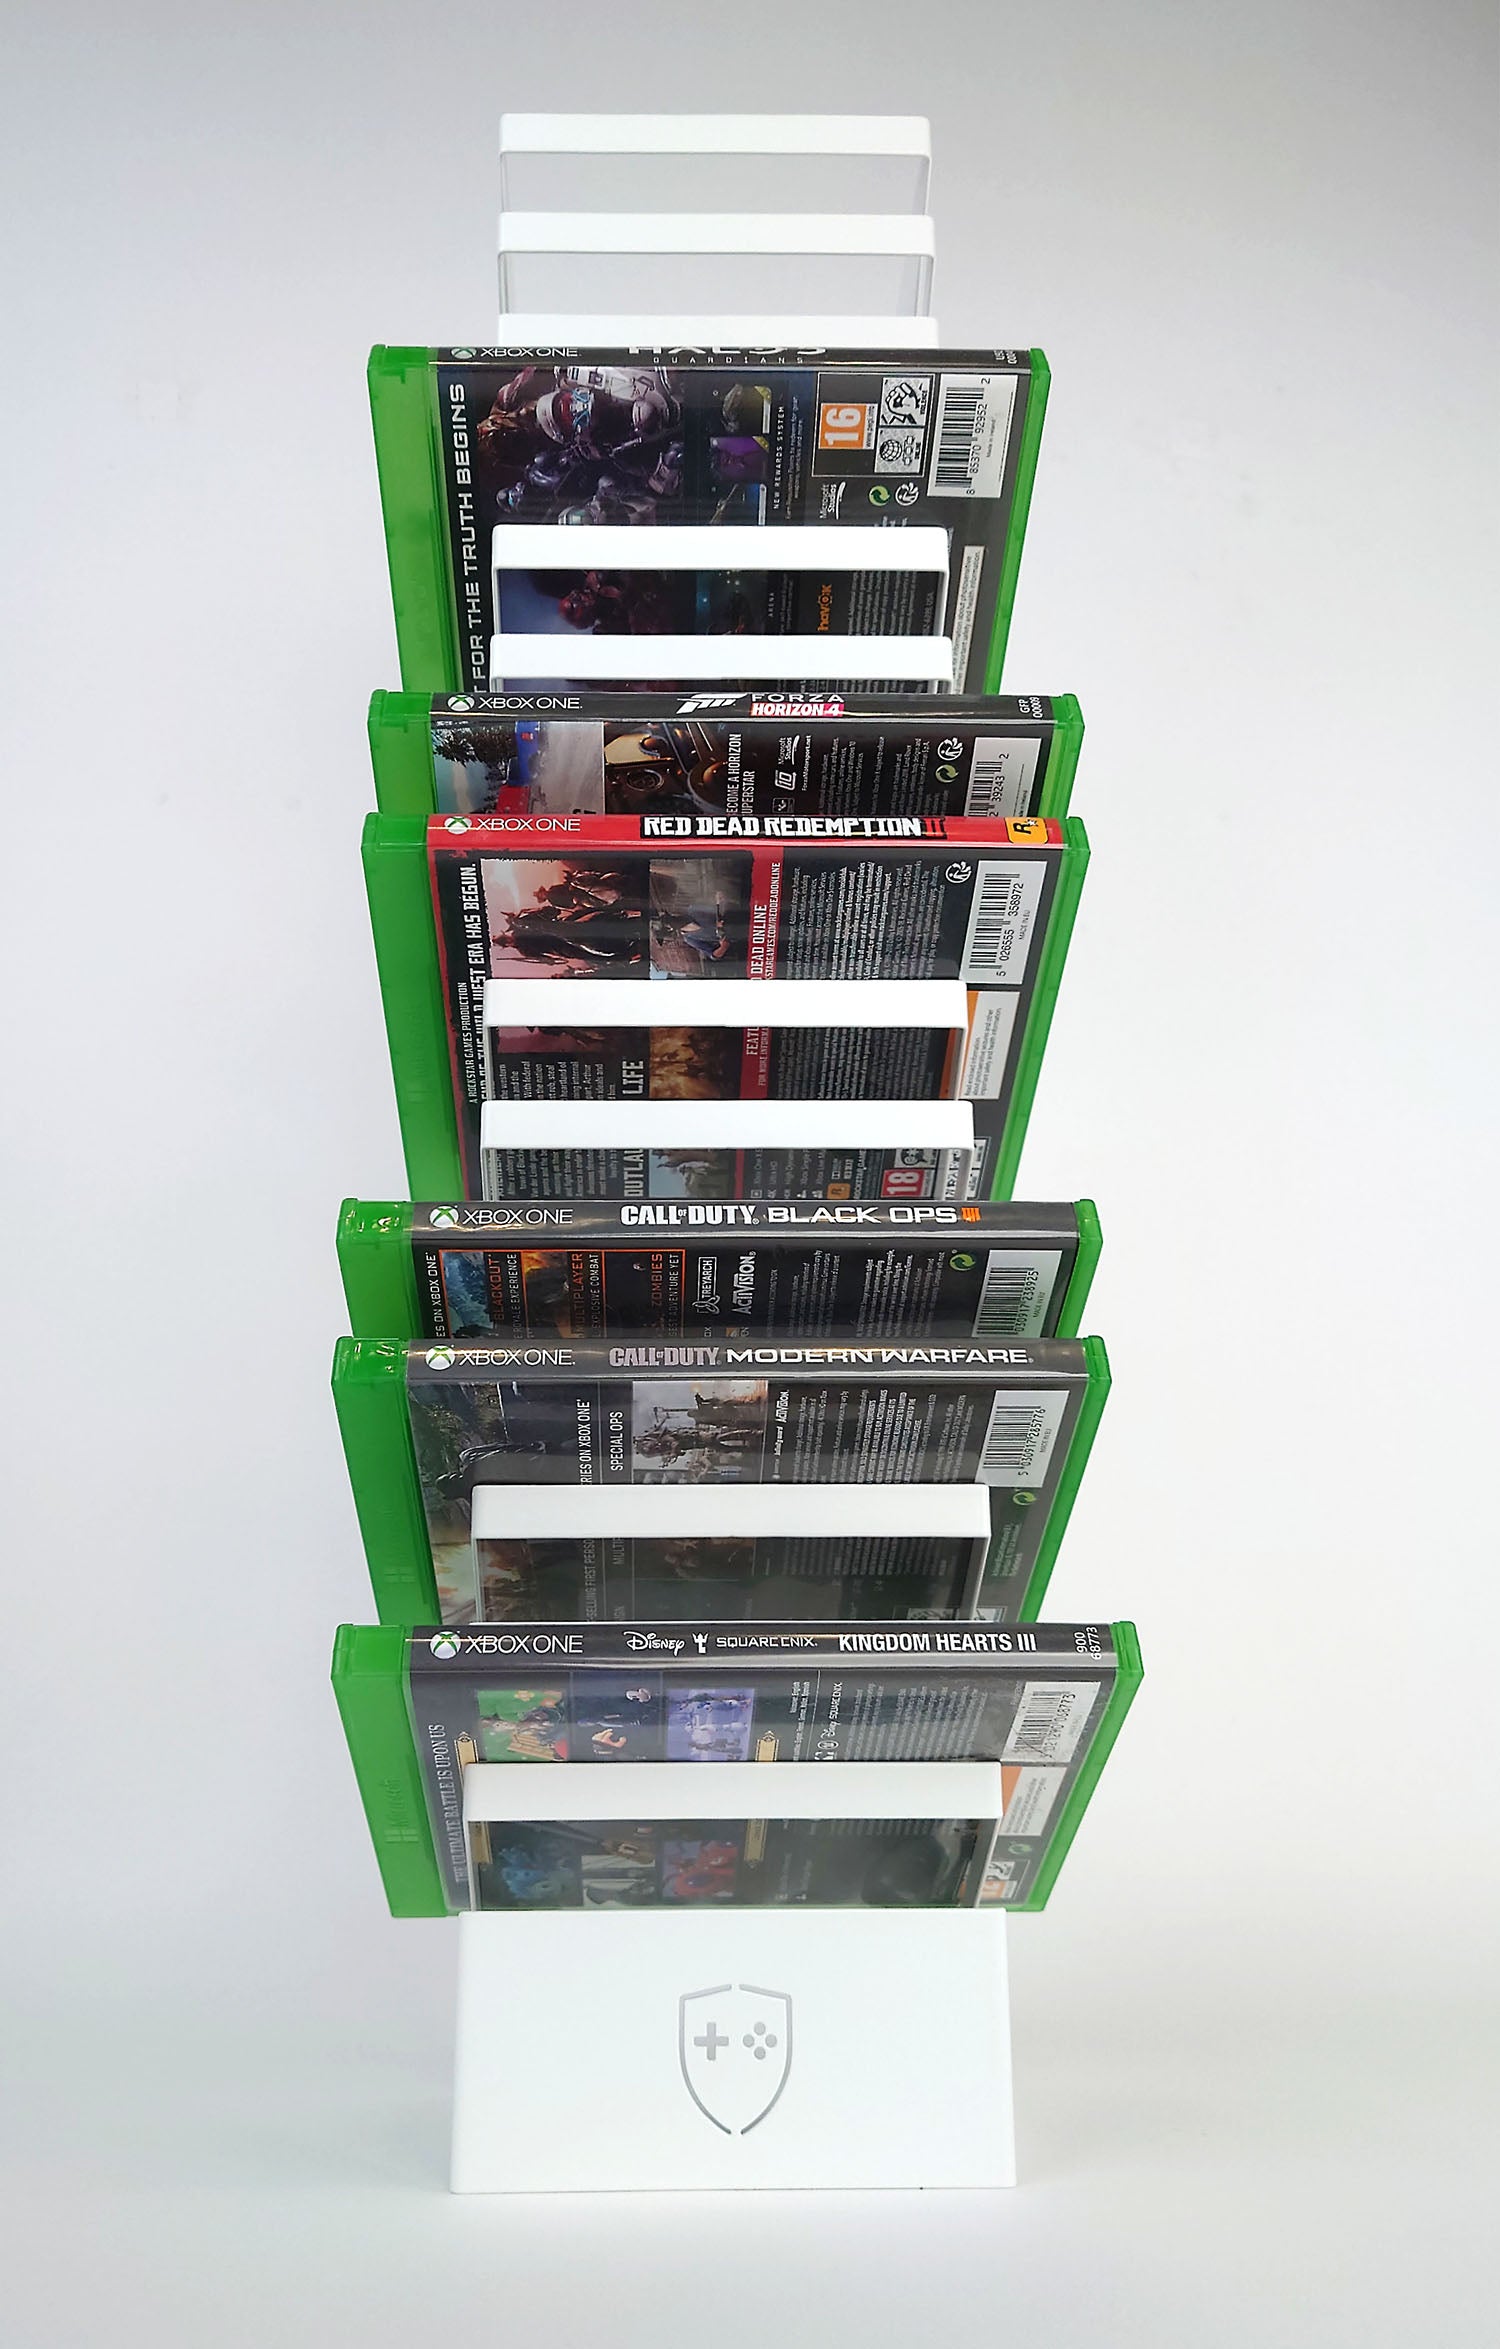 Games Tower Storage Rack, All 3 Sizes in a line with PS4 games and Blu Rays on Display